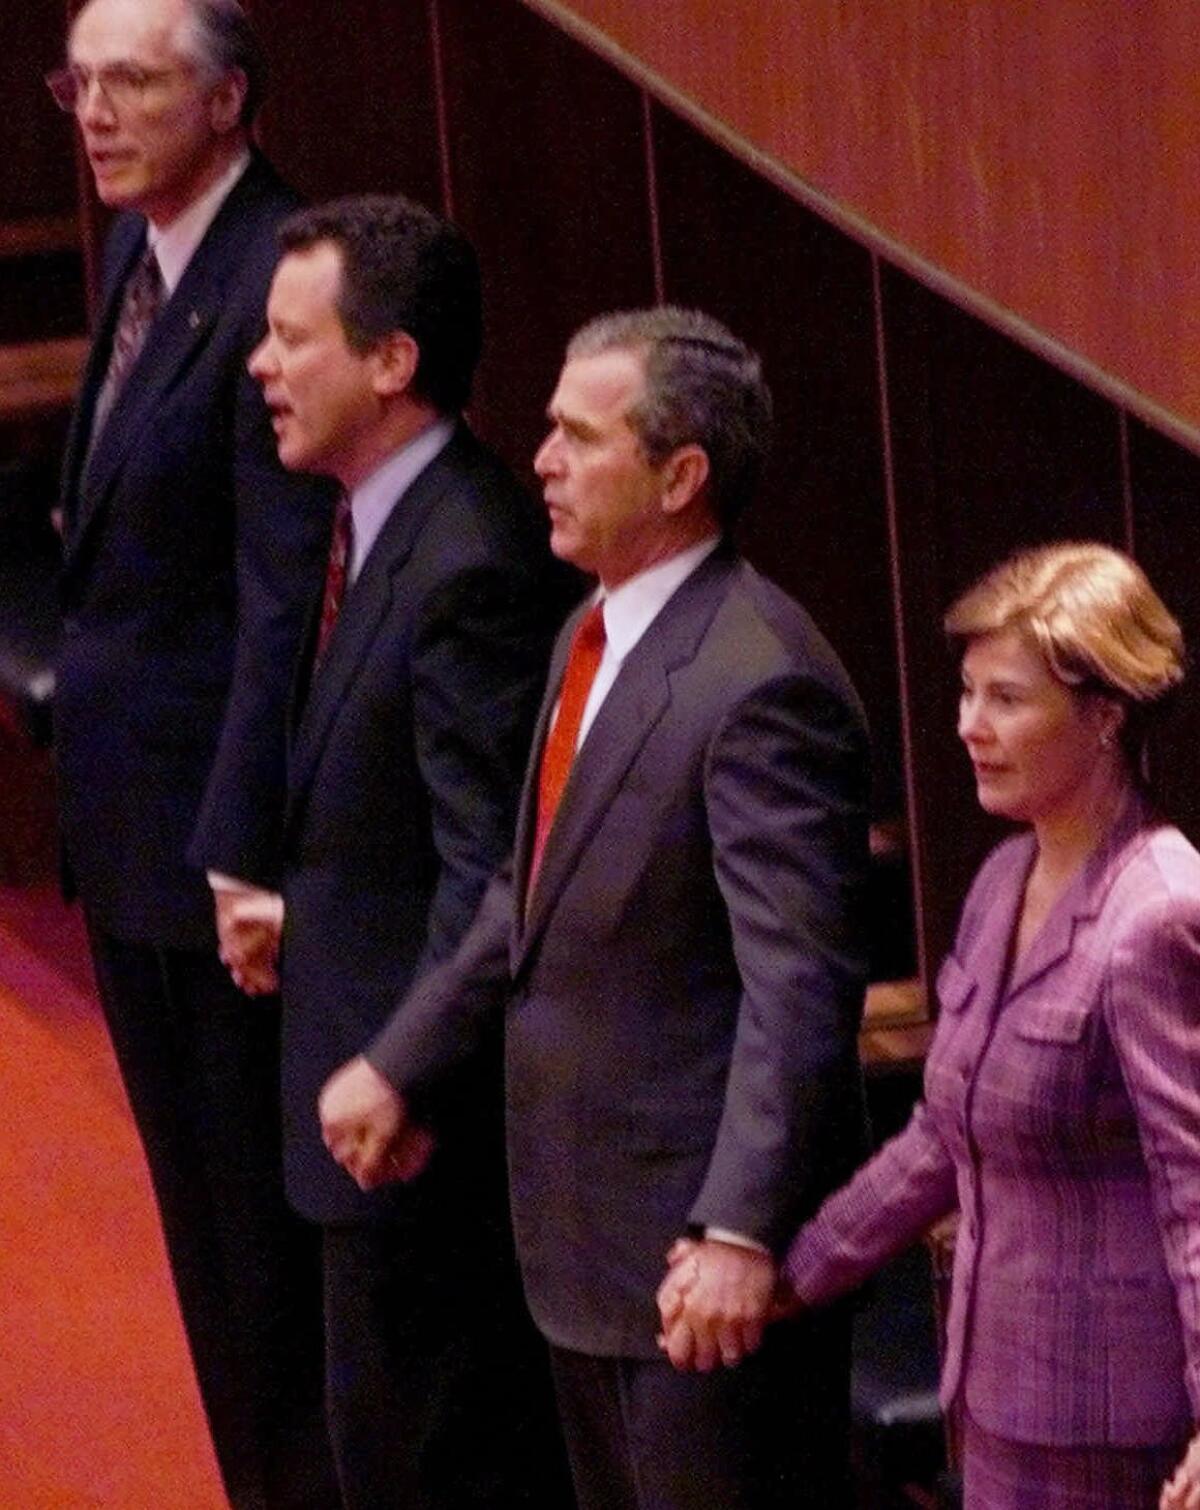 George W. Bush, right, attends an event with then-president of Bob Jones University Bob Jones III, left, and former South Carolina Gov. David Beasley in 2000 at the school in Greenville, S.C .